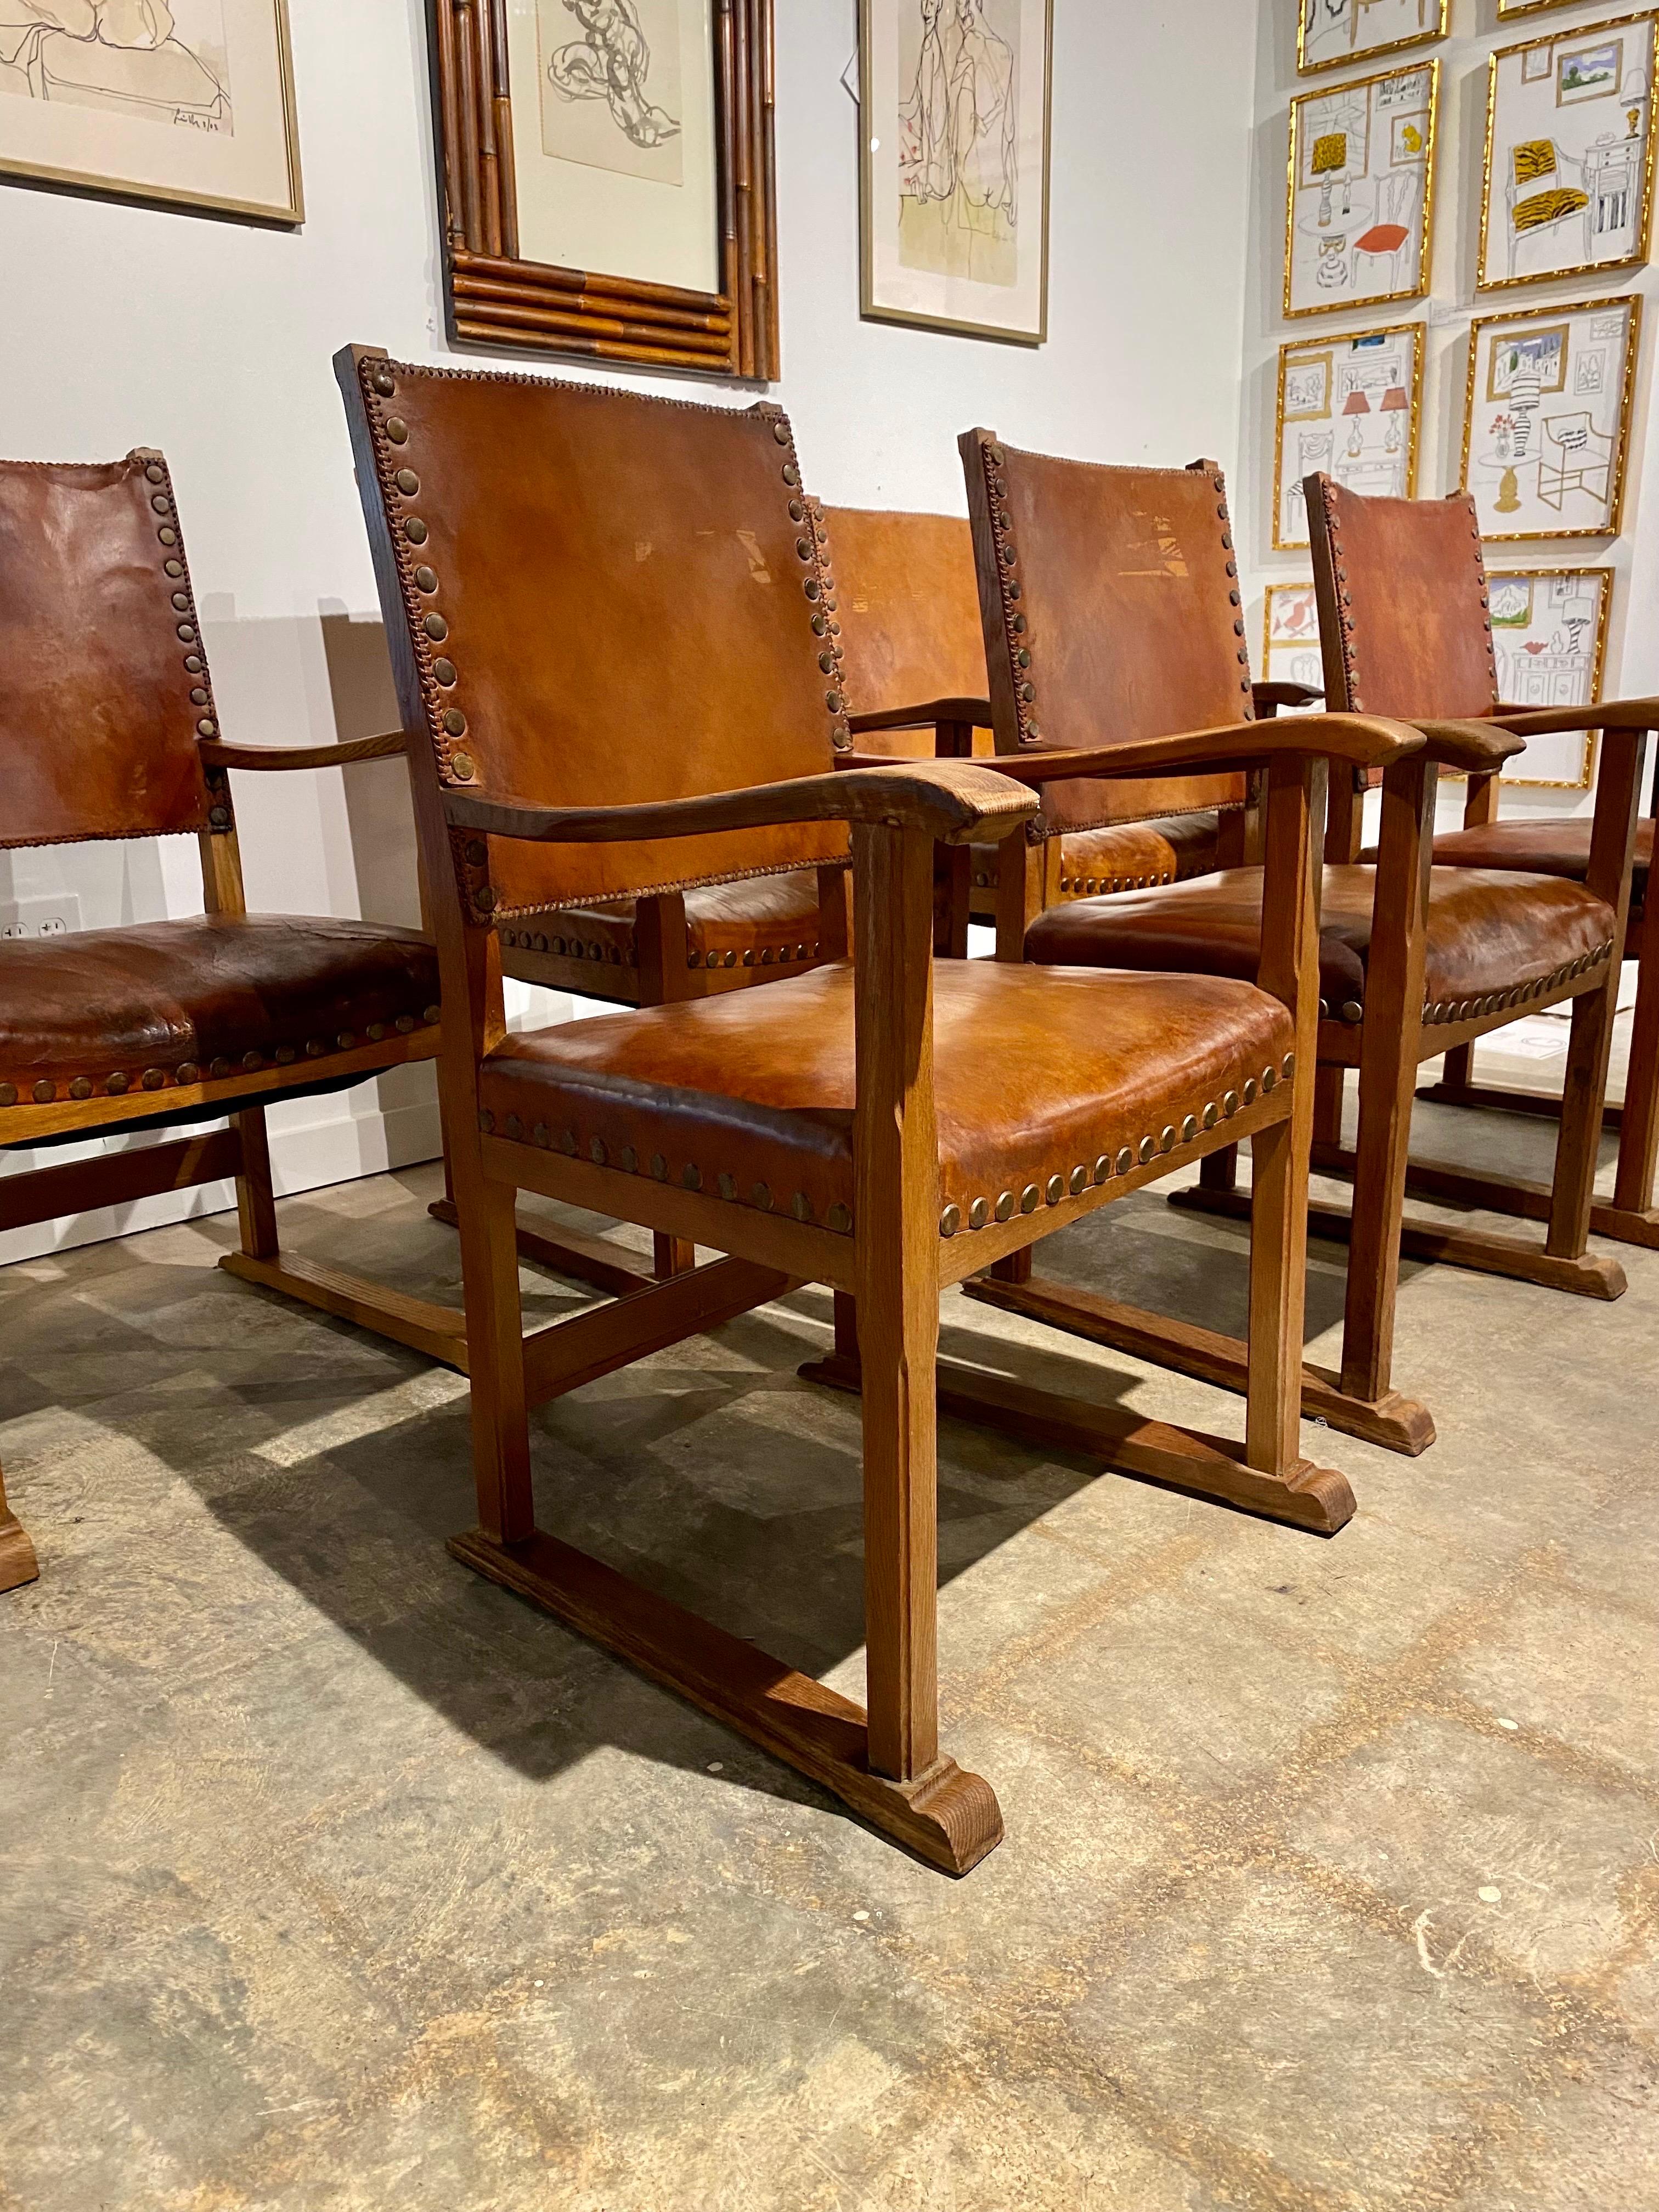 Unique sled base design with oak frames and heavy leather upholstery. Brass nailhead trim with carved oak frames. These show heavy wear but are usable as is. One of the seats is ripped through, however, as shown. An outstanding and eye-catching set